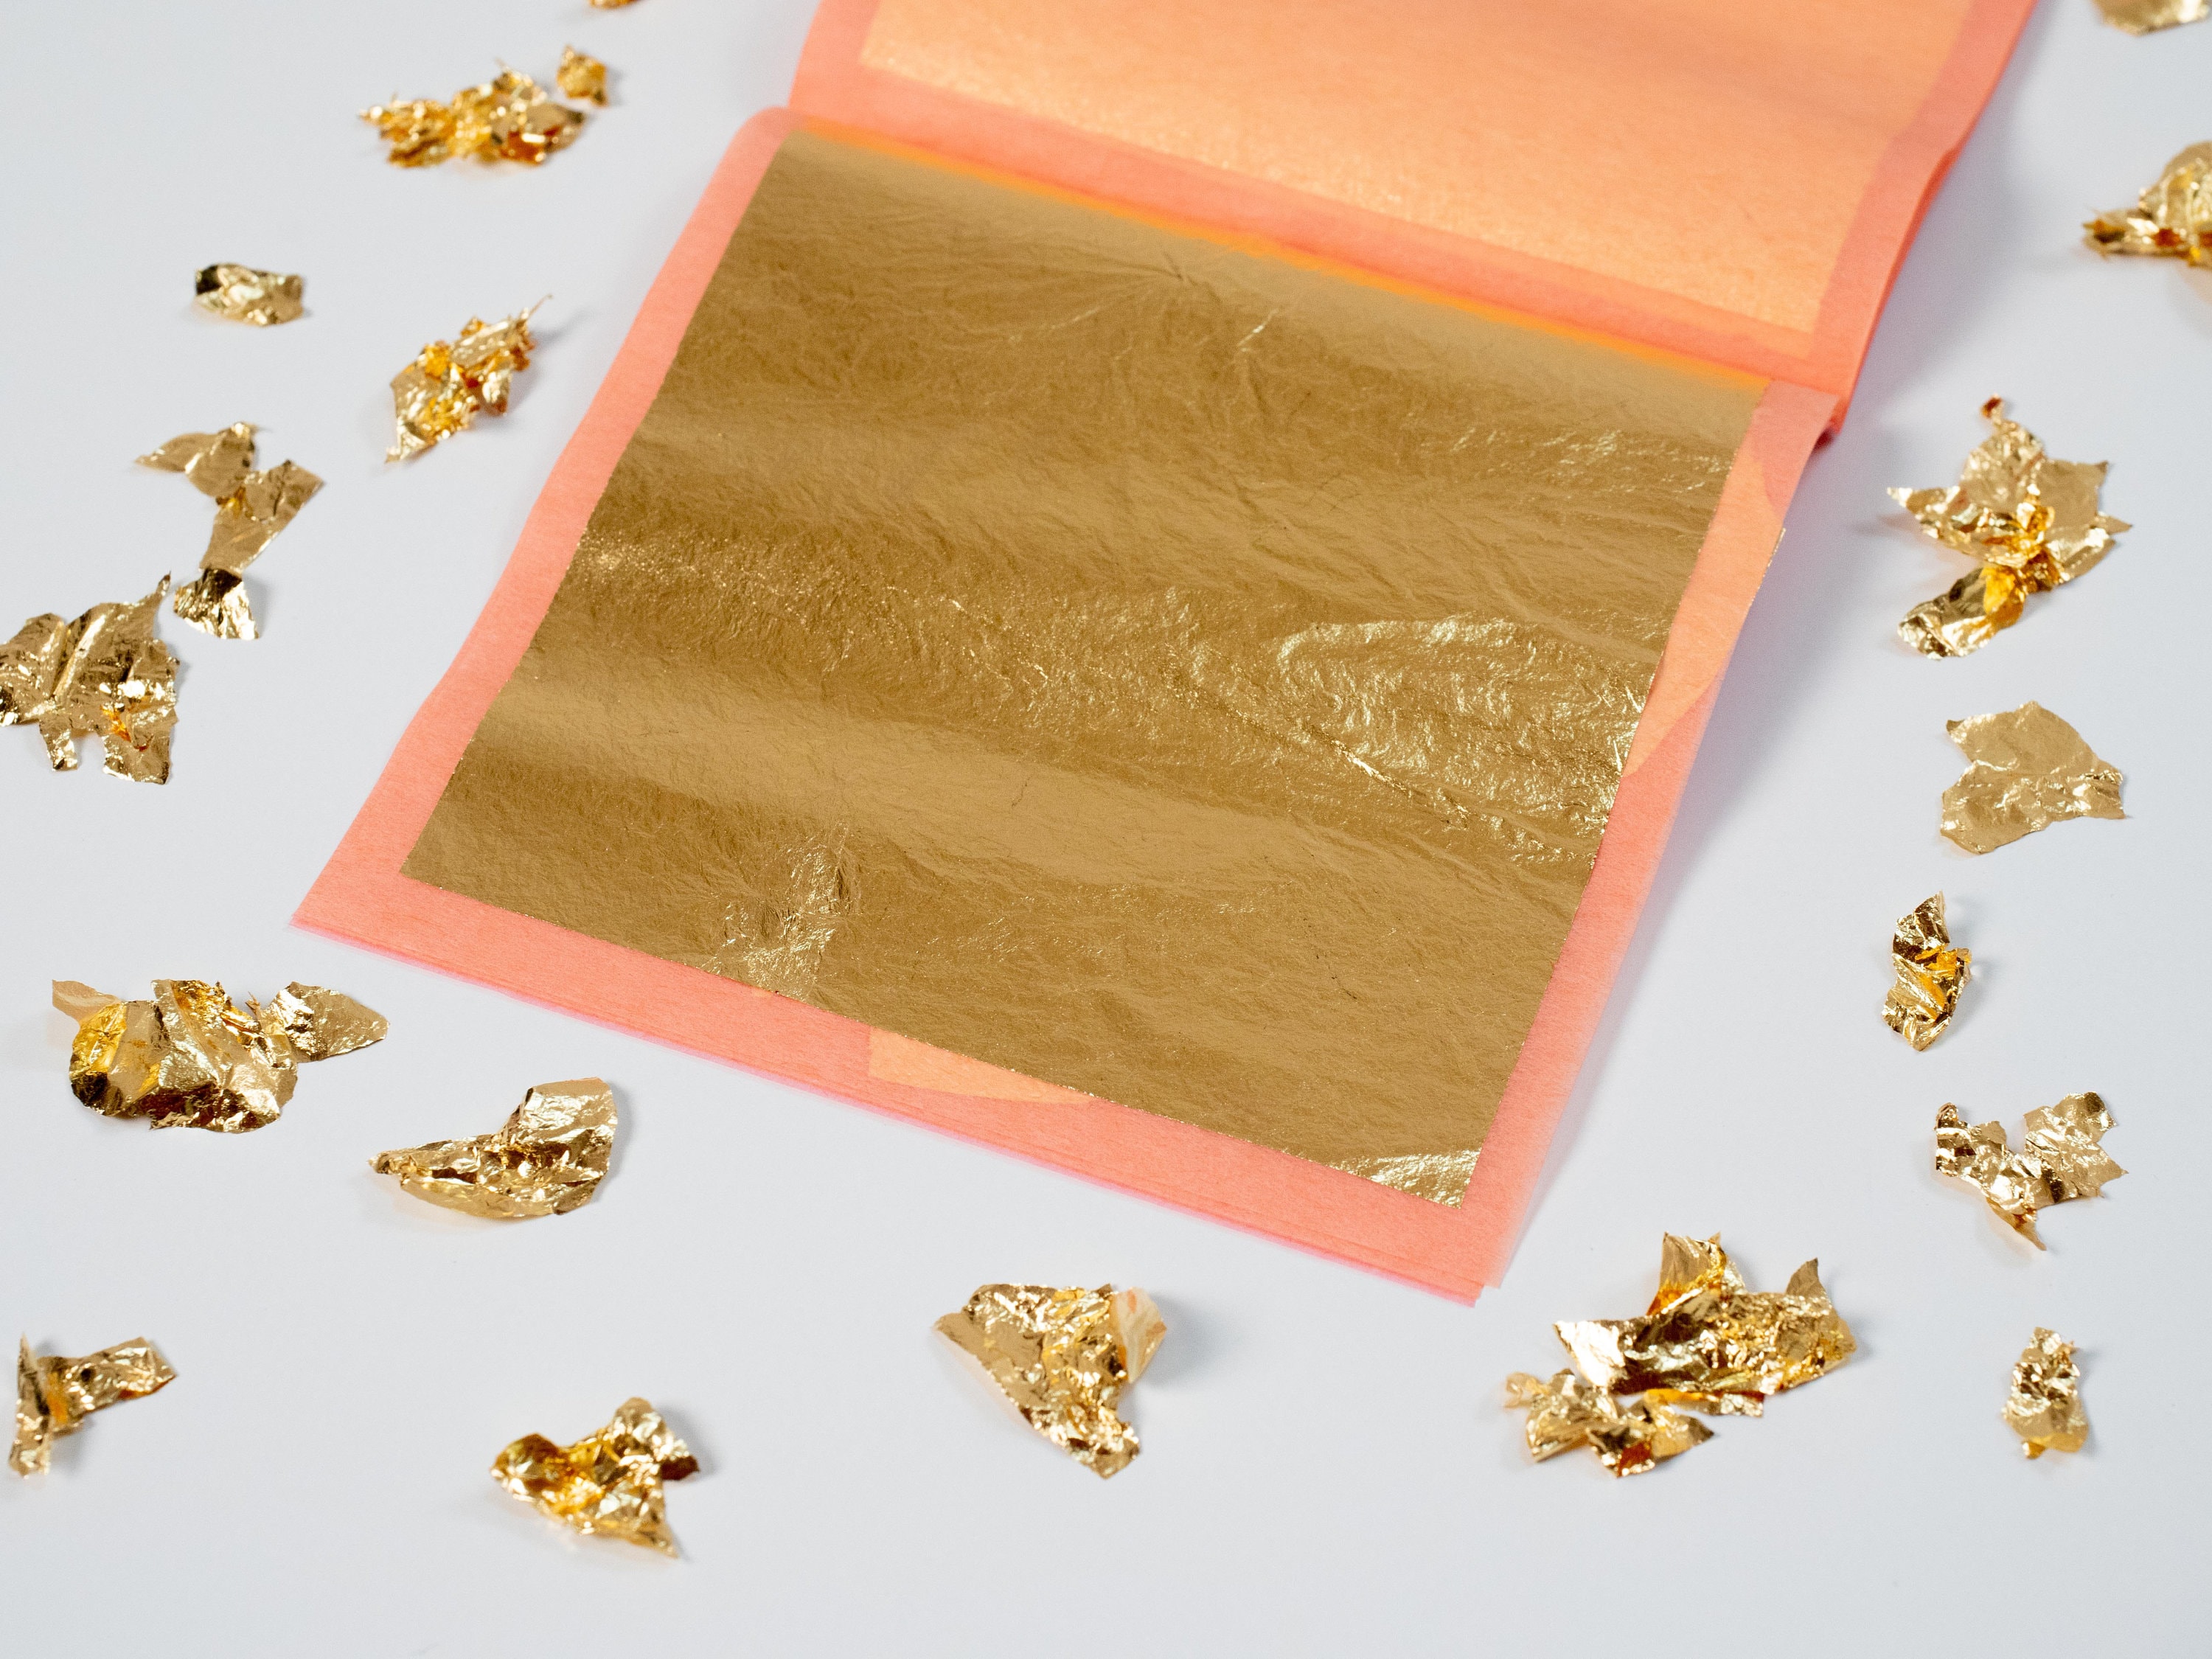 Large 24k edible gold flakes - Buy at Gold Leaf NZ - Free Shipping